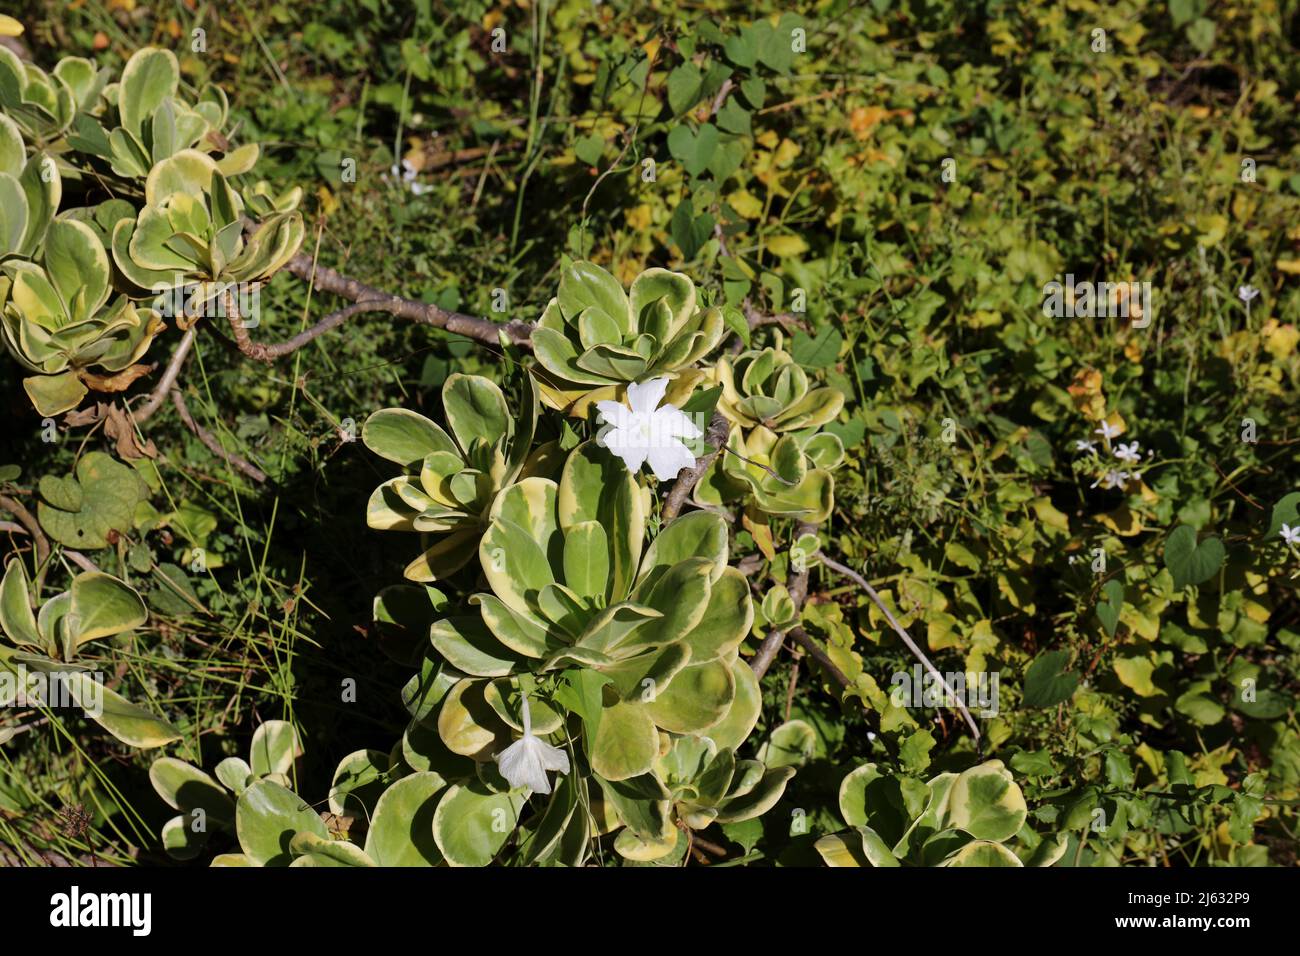 Scaevola taccada with a white flower growing on the ground amongst other vegetation in Kauai, Hawaii, USA Stock Photo